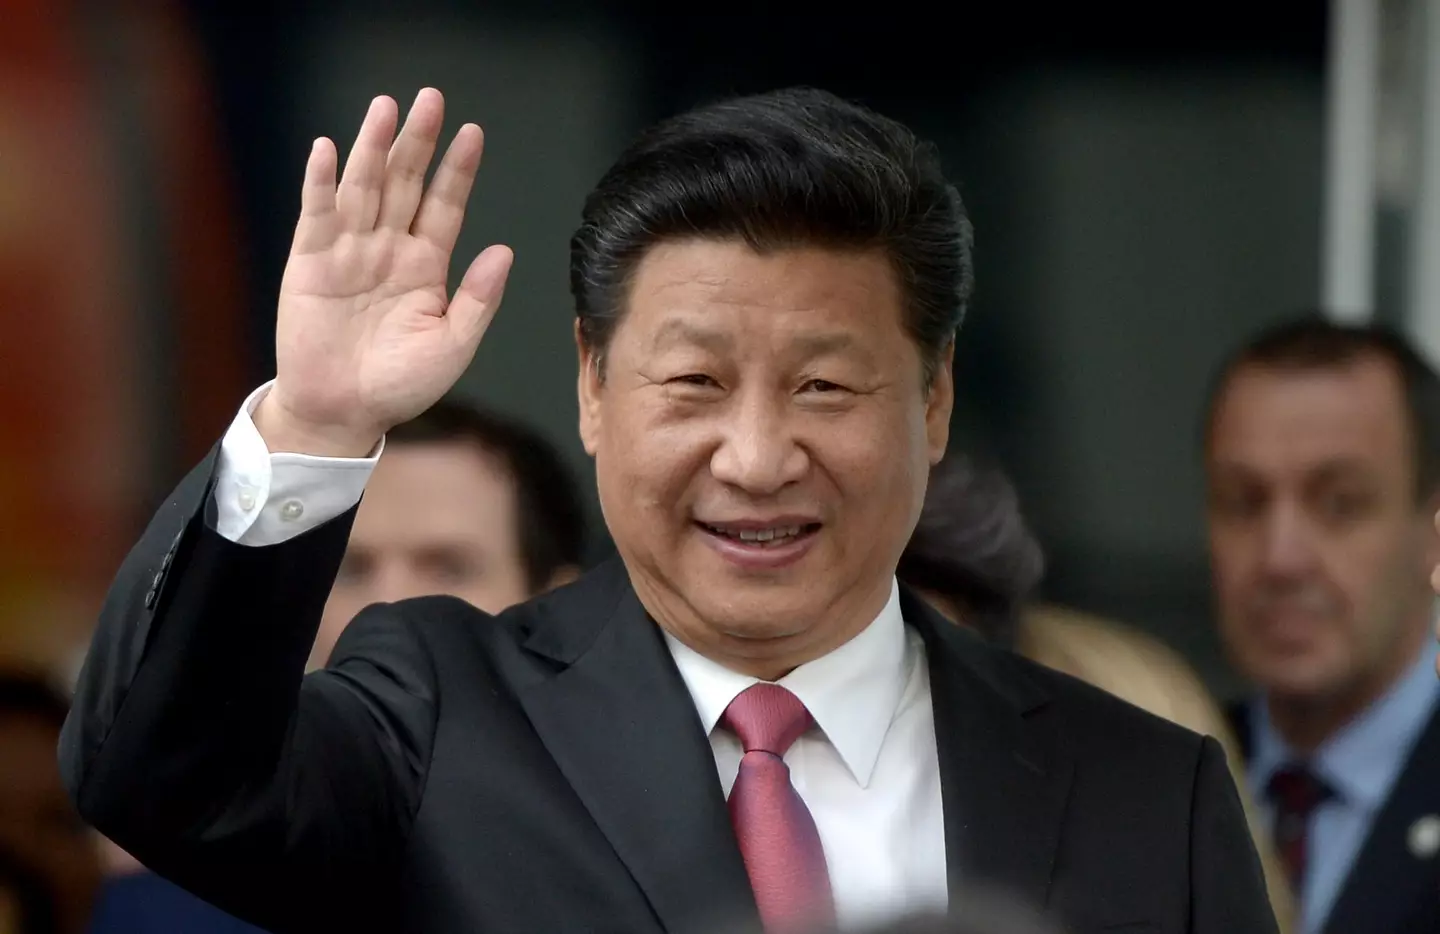 Some are speculating that Xi Jinping will try and rule for the rest of his life.